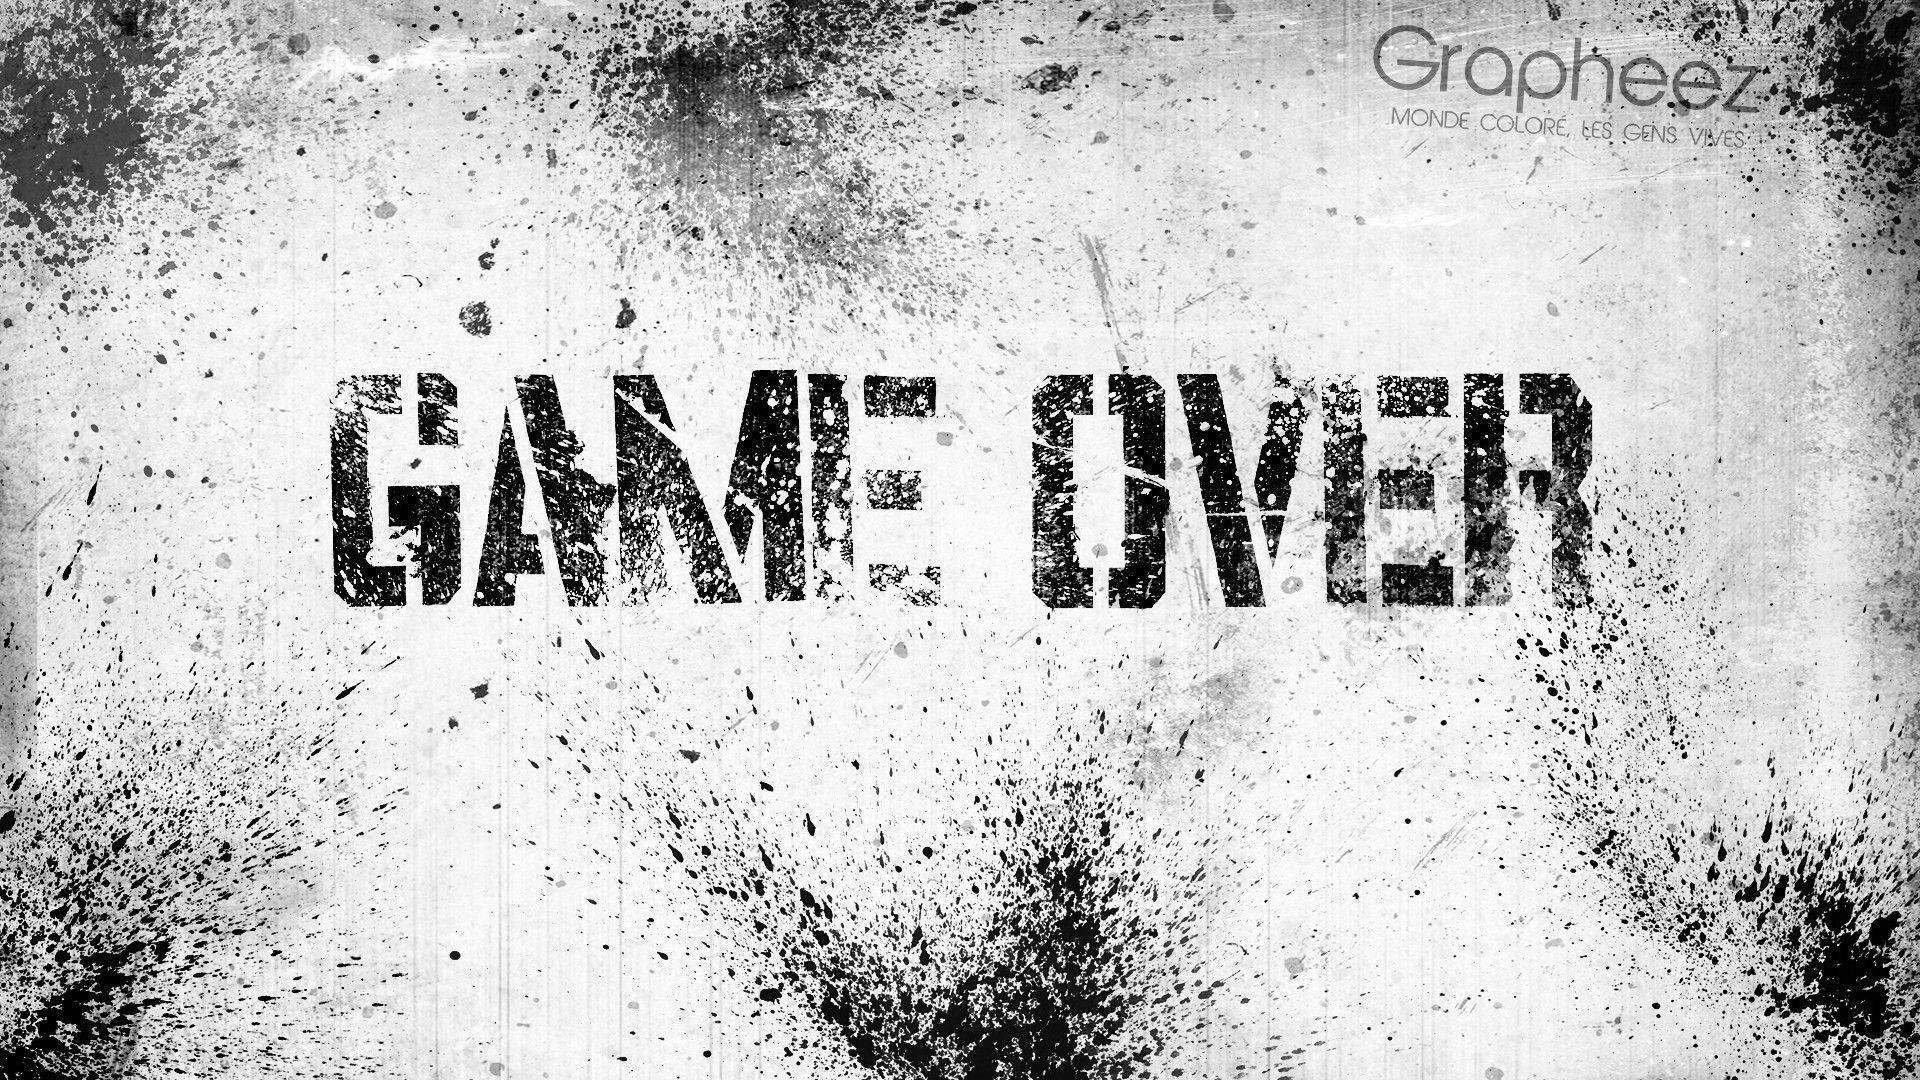 Game Over Wallpapers Wallpaper Cave HD Wallpapers Download Free Images Wallpaper [wallpaper981.blogspot.com]